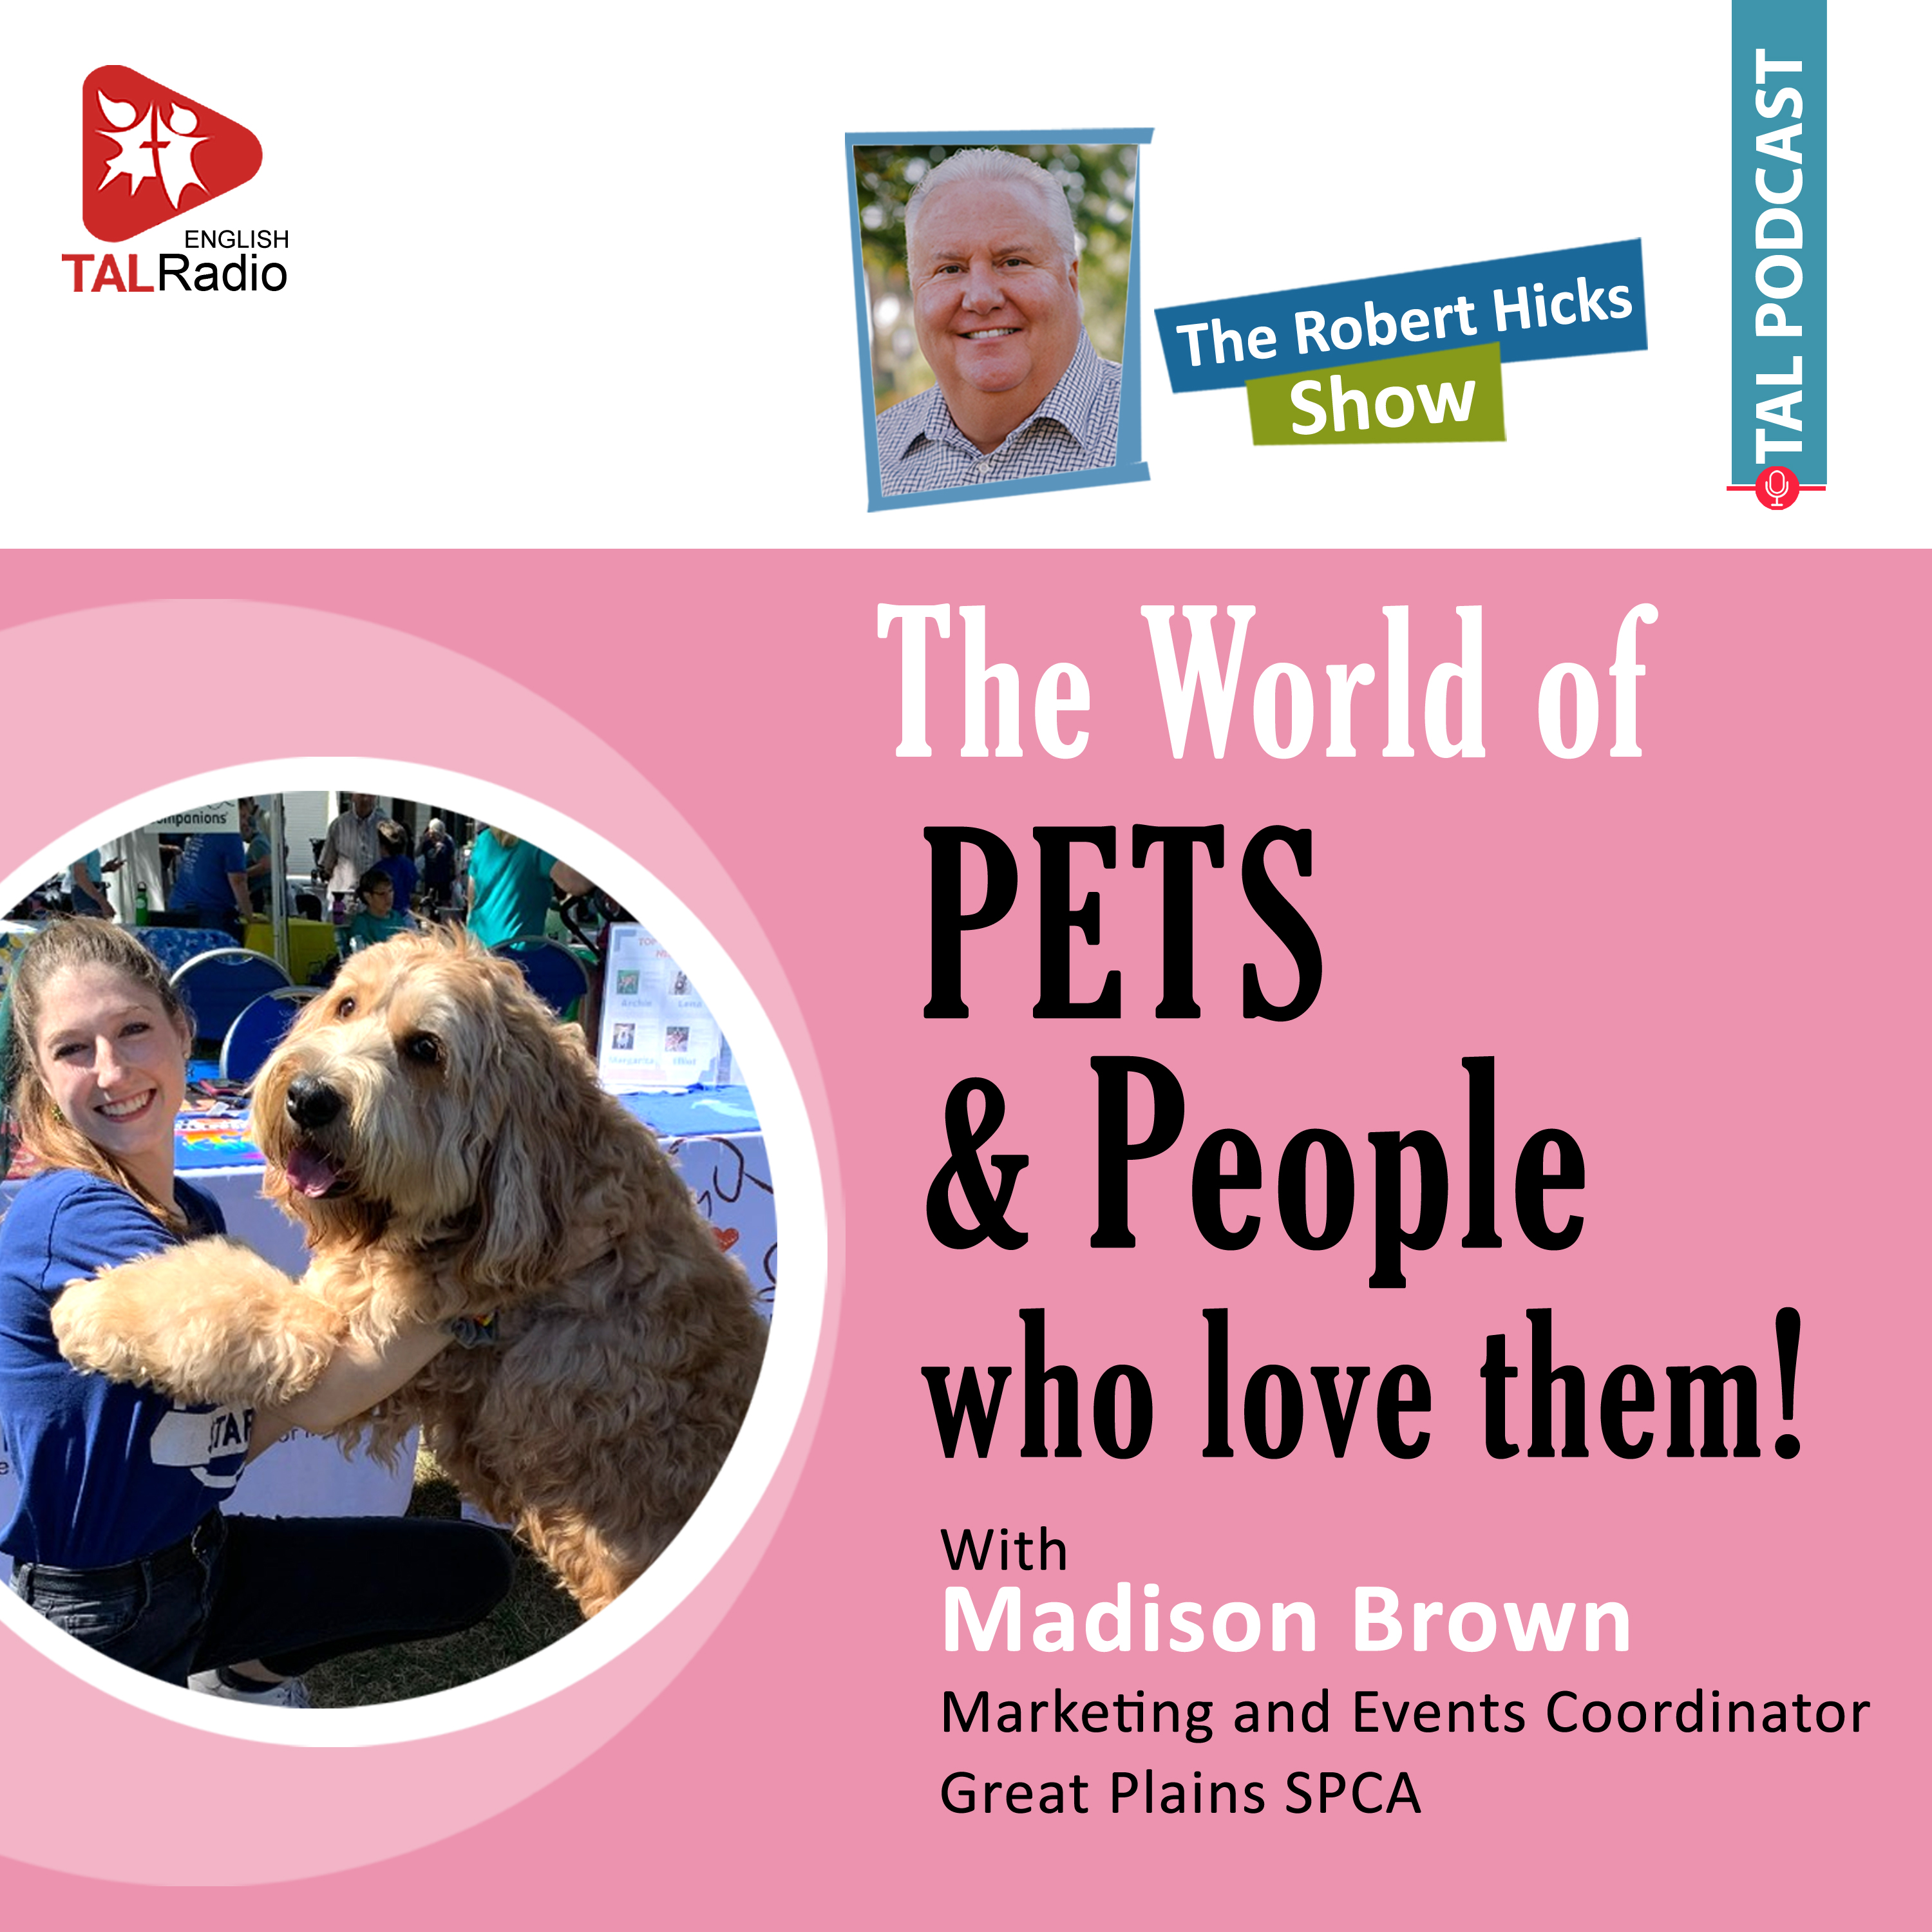 Pets & People who love them | Robert Hicks Show